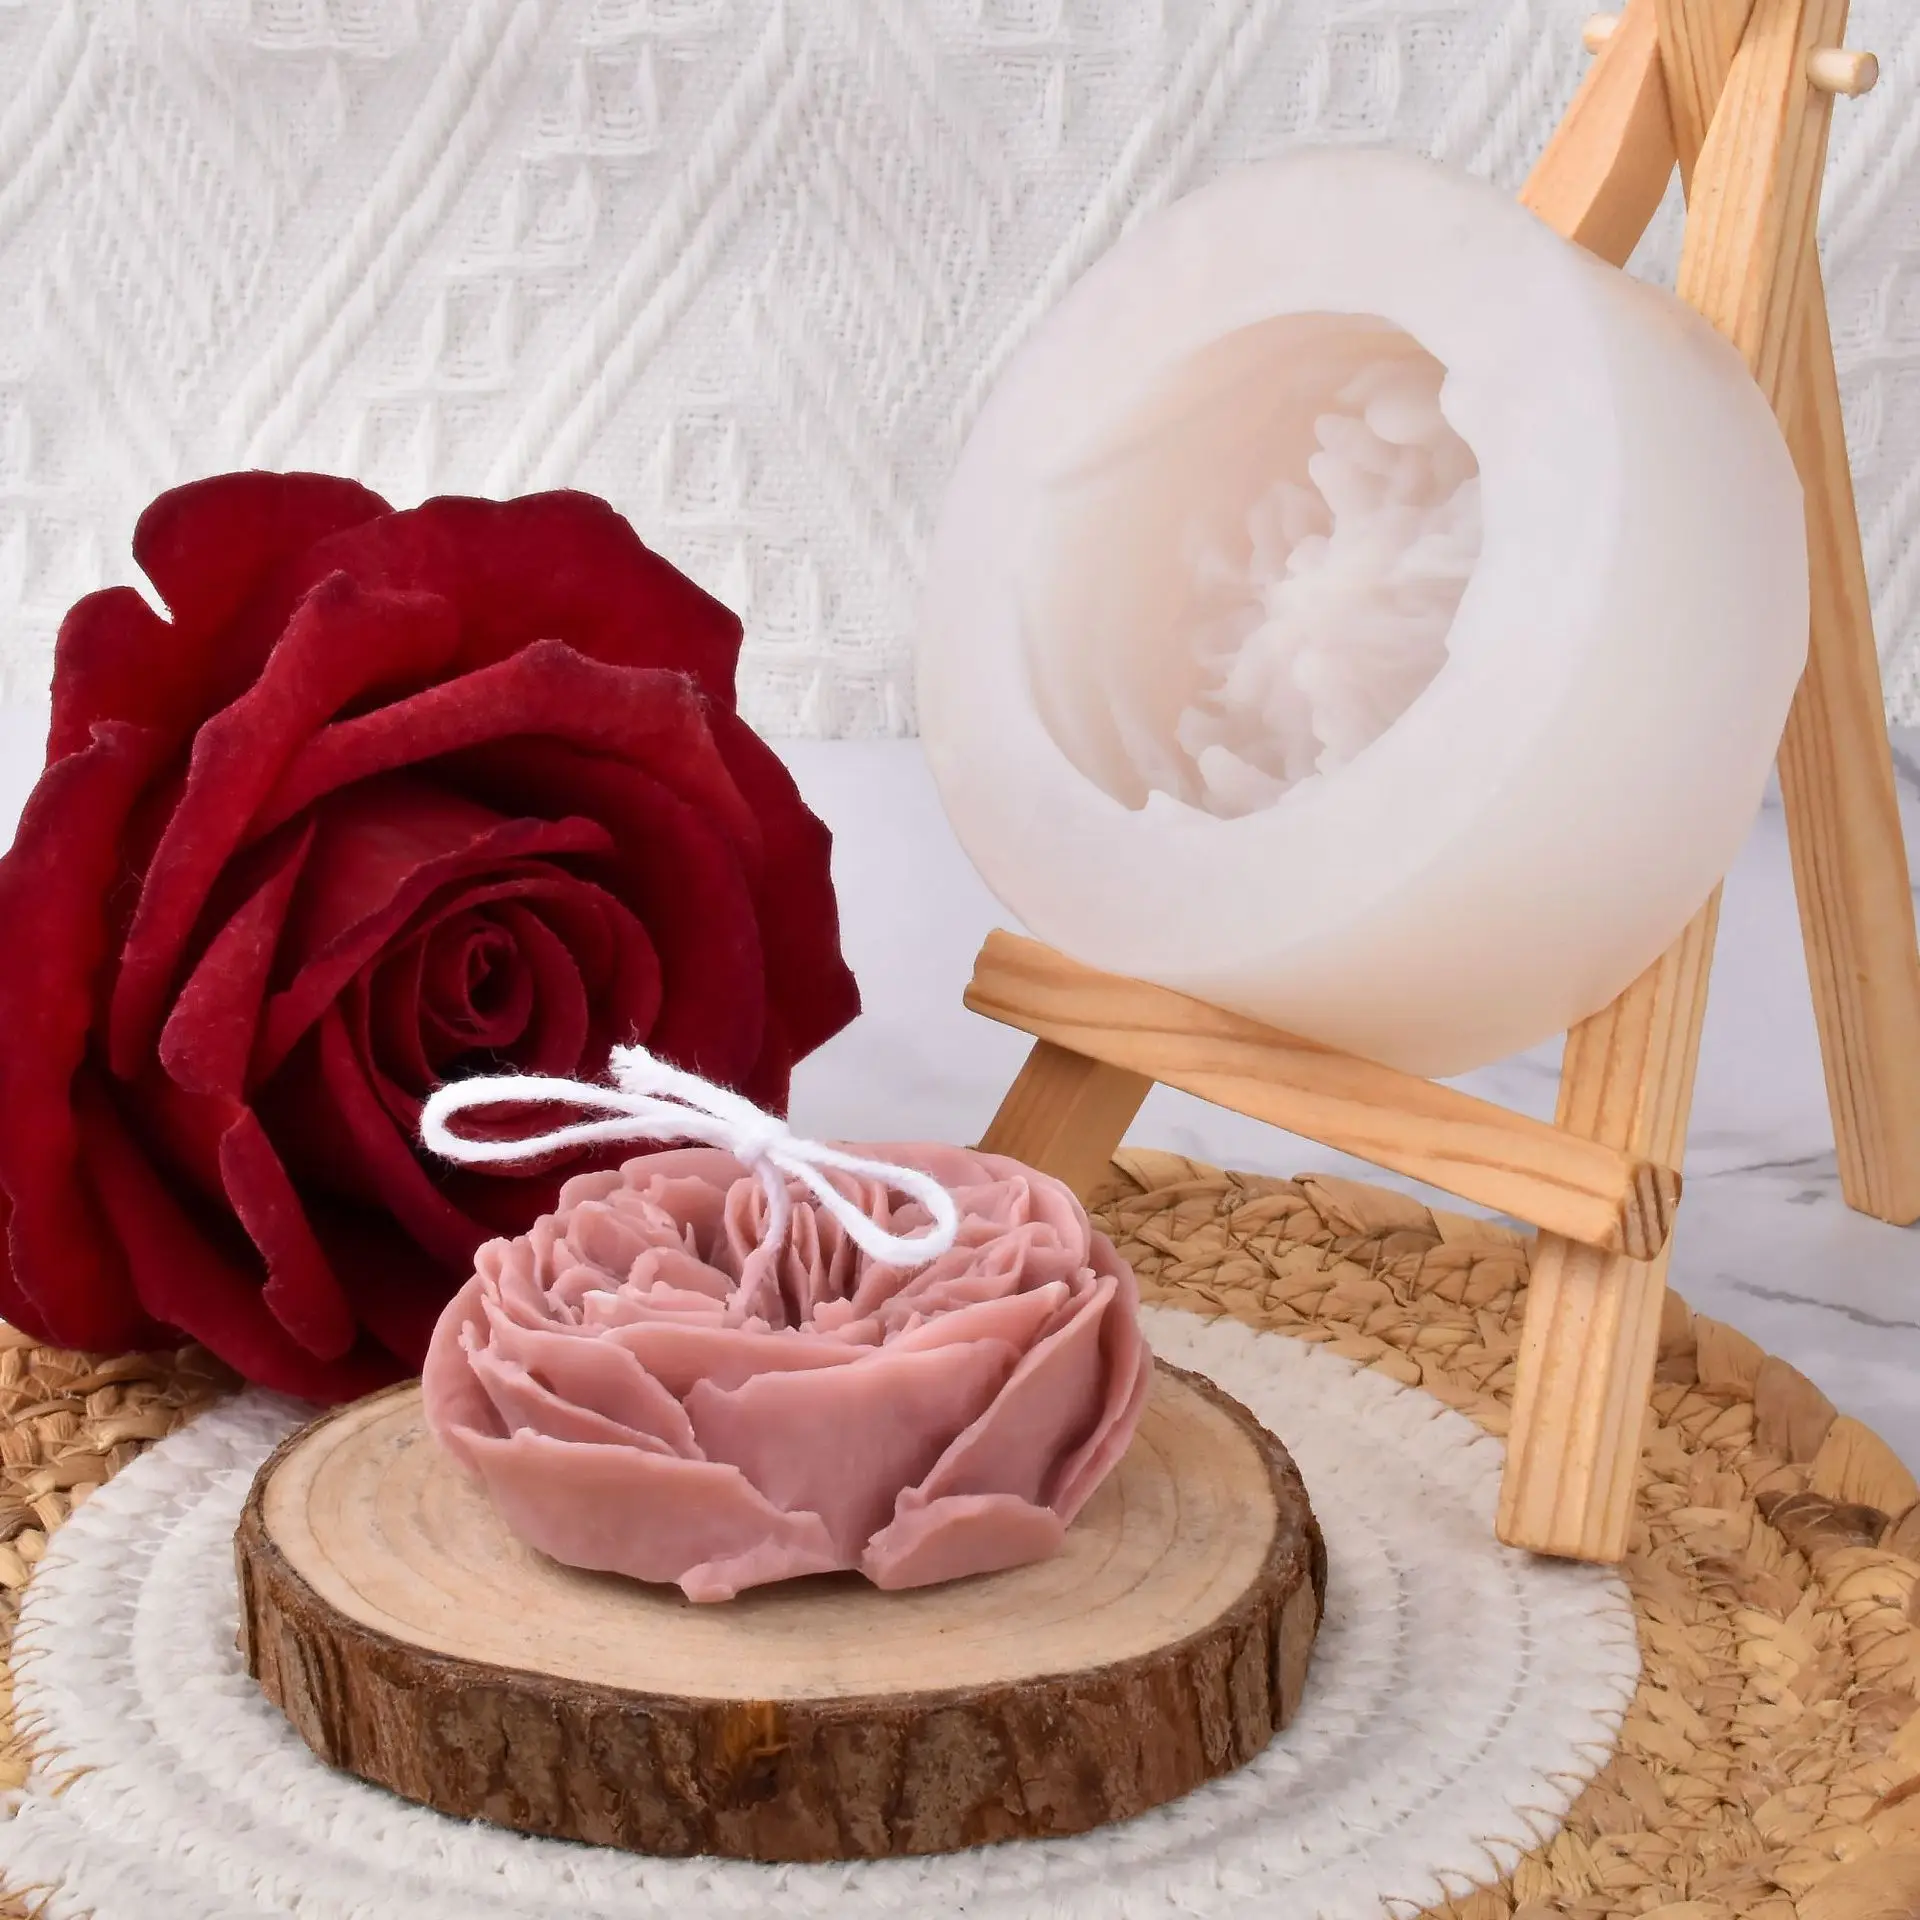 China Silicone Rose Mold, Silicone Rose Mold Wholesale, Manufacturers,  Price